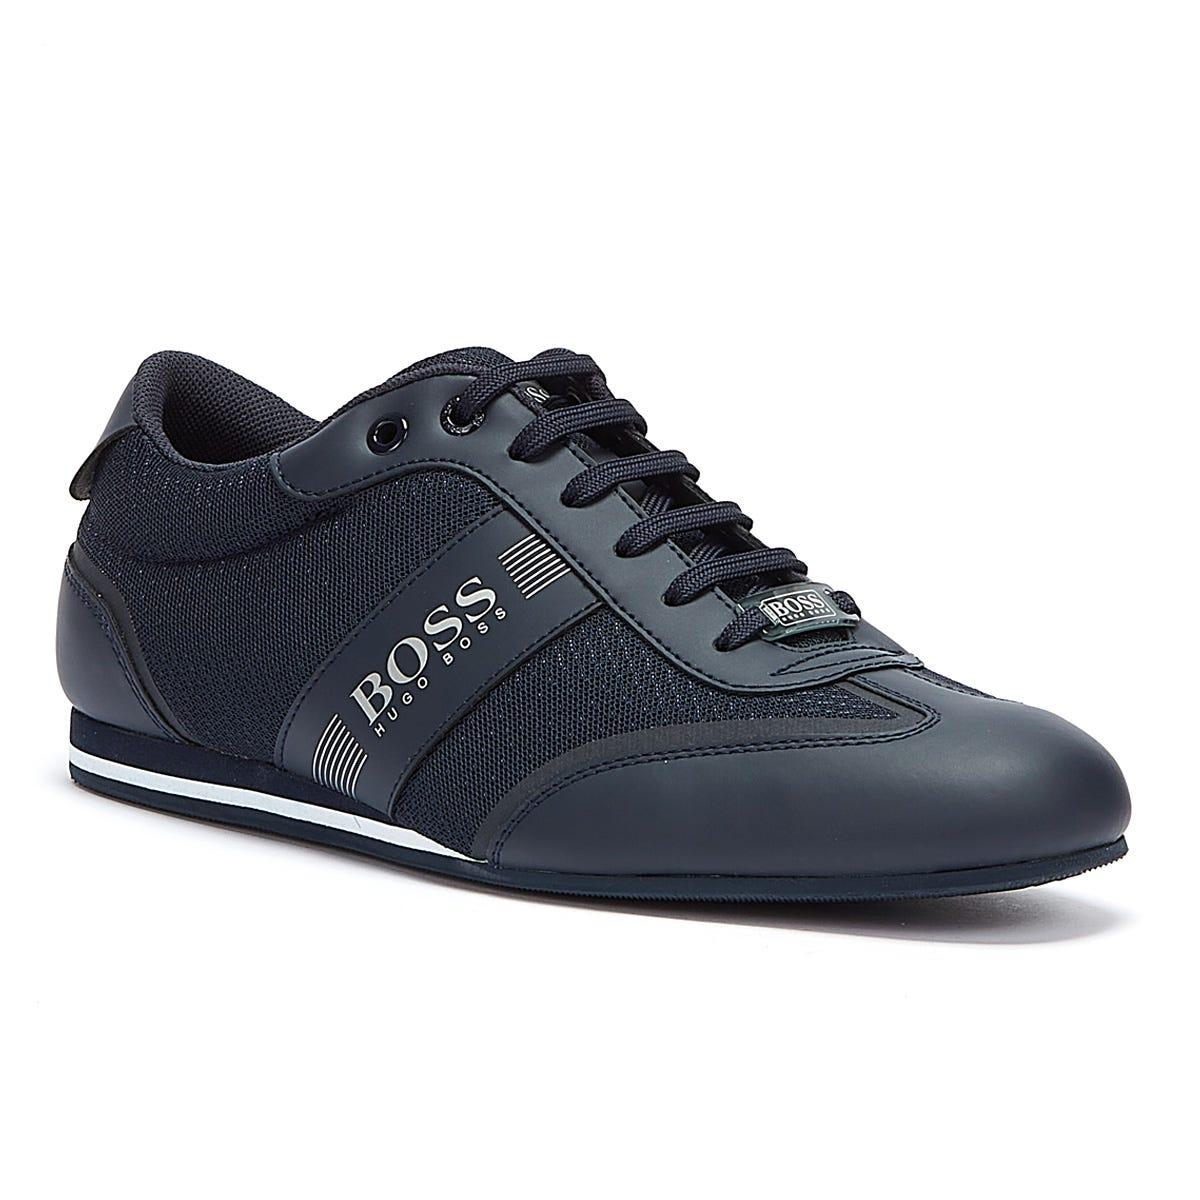 BOSS by HUGO BOSS Lace Lighter Mix Low Dark Trainers in Blue for Men - Lyst